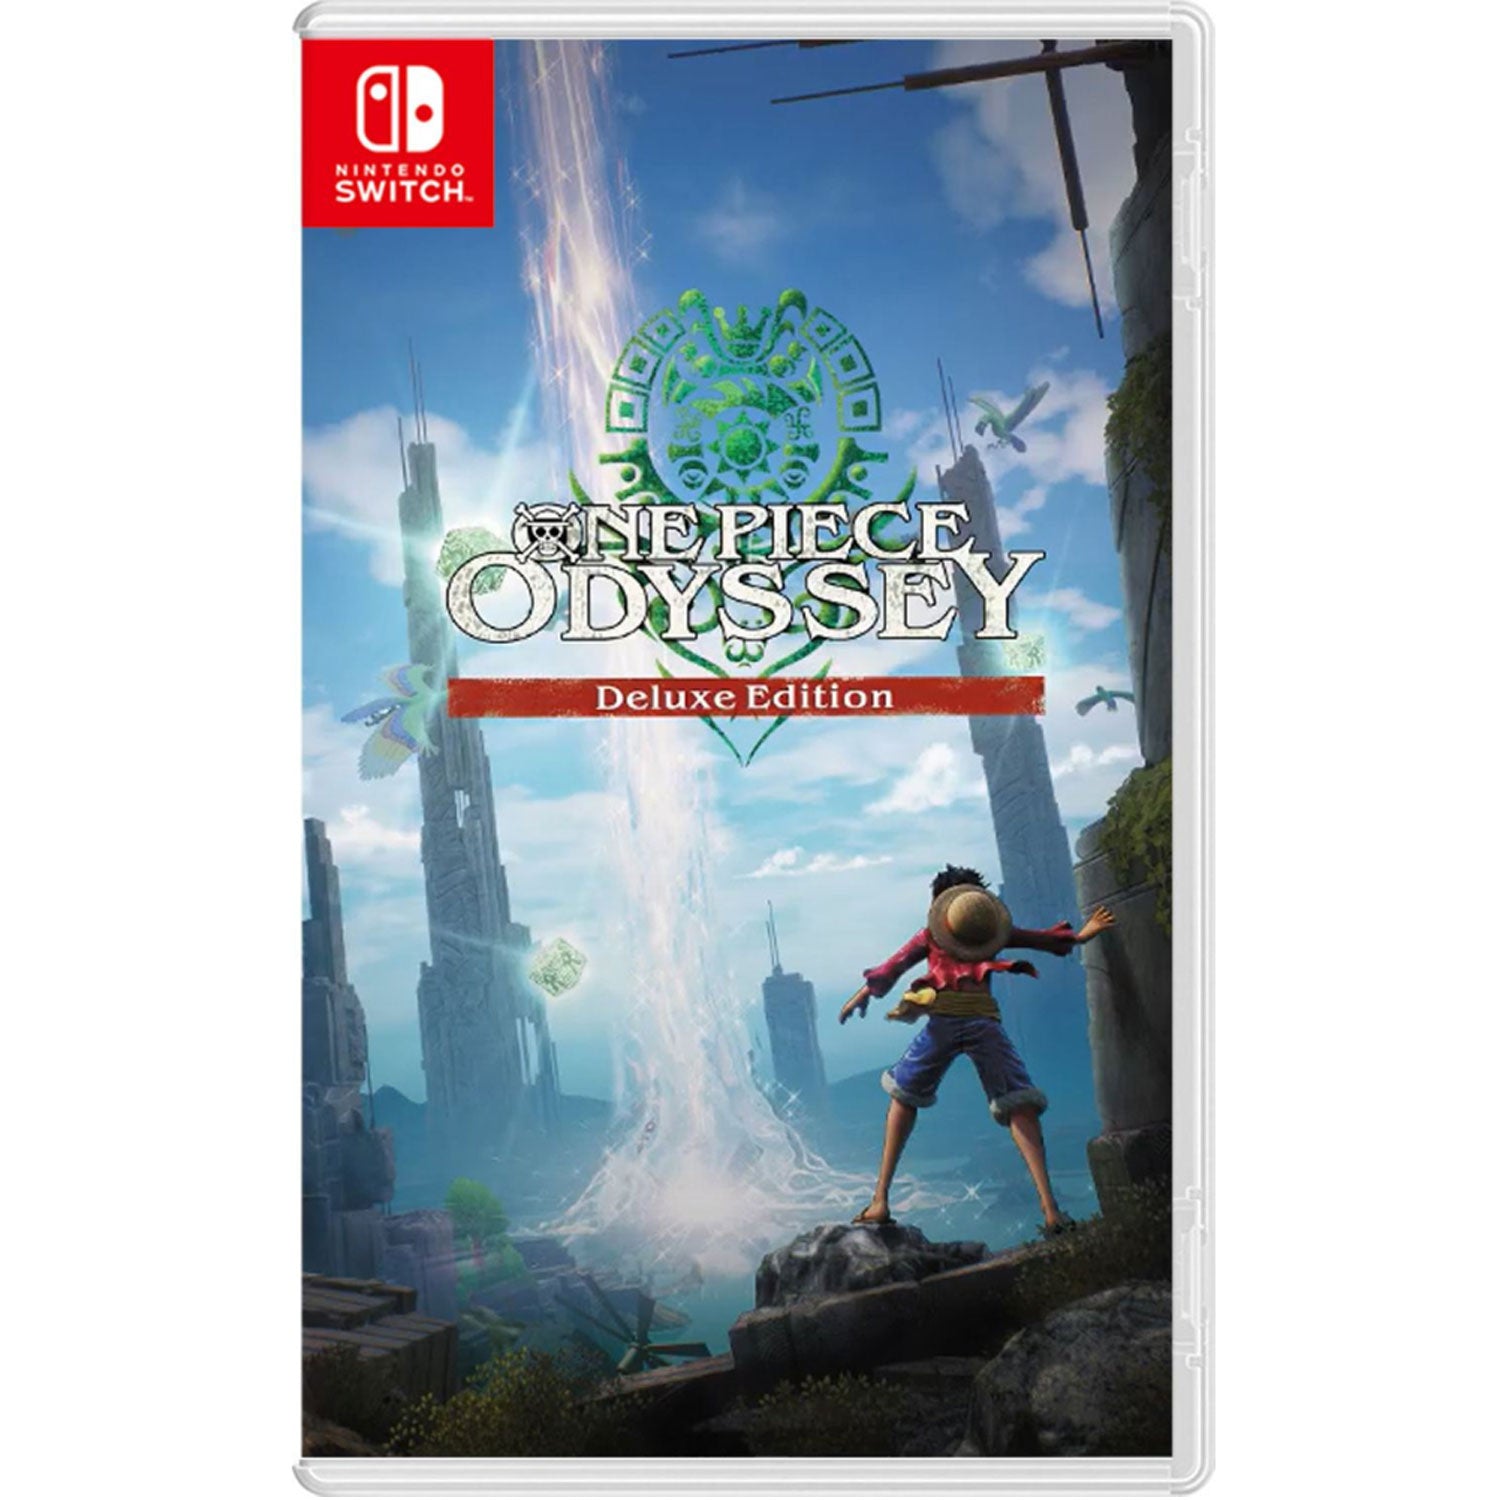 Nintendo Switch One Piece Odyssey Deluxe Edition